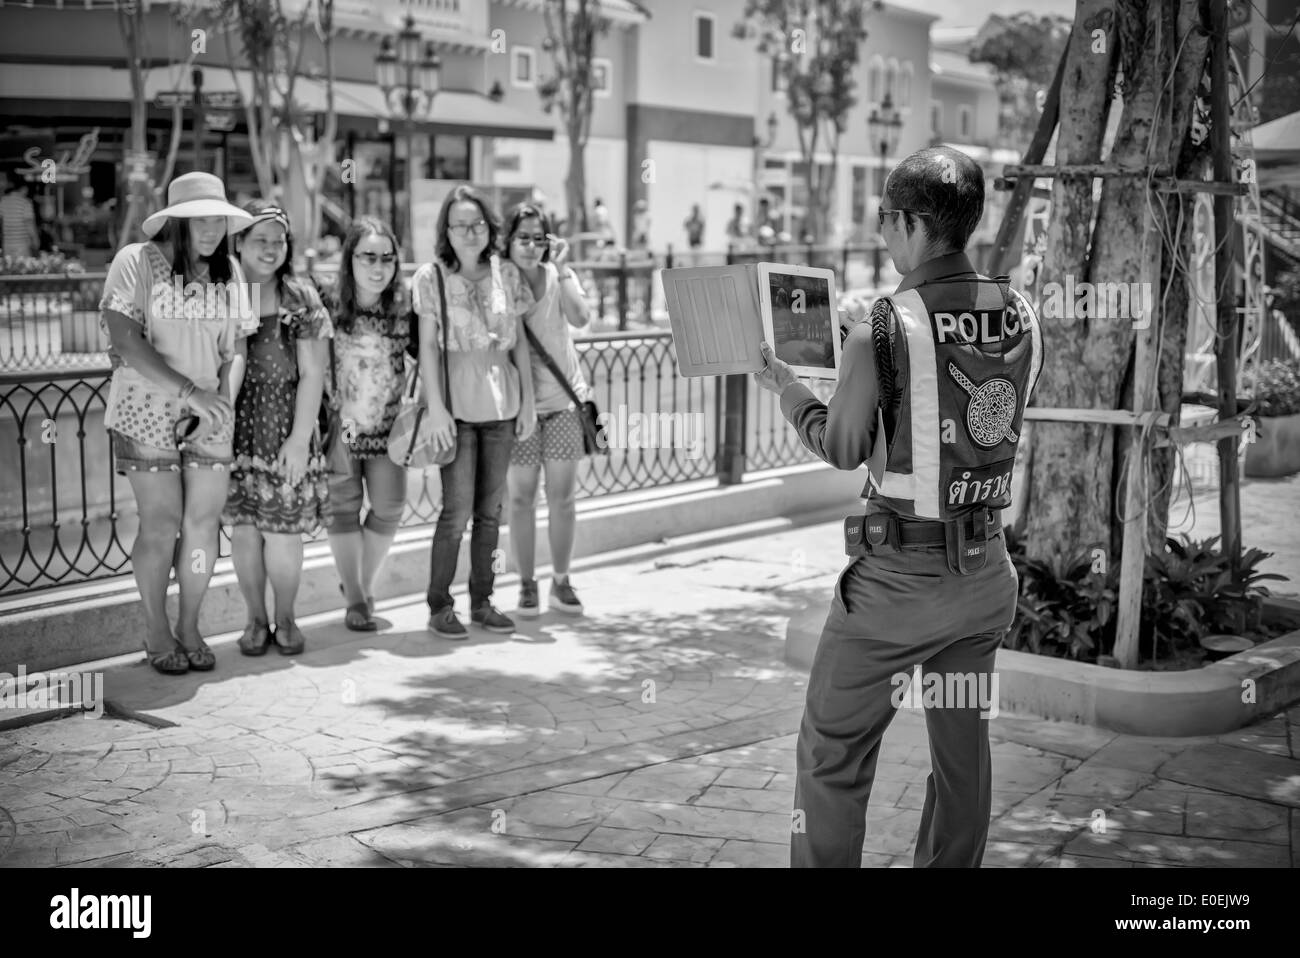 Thailand police officer assisting local tourist group by taking their photograph on an iPad tablet. Thailand S. E. Asia Black and white photography Stock Photo